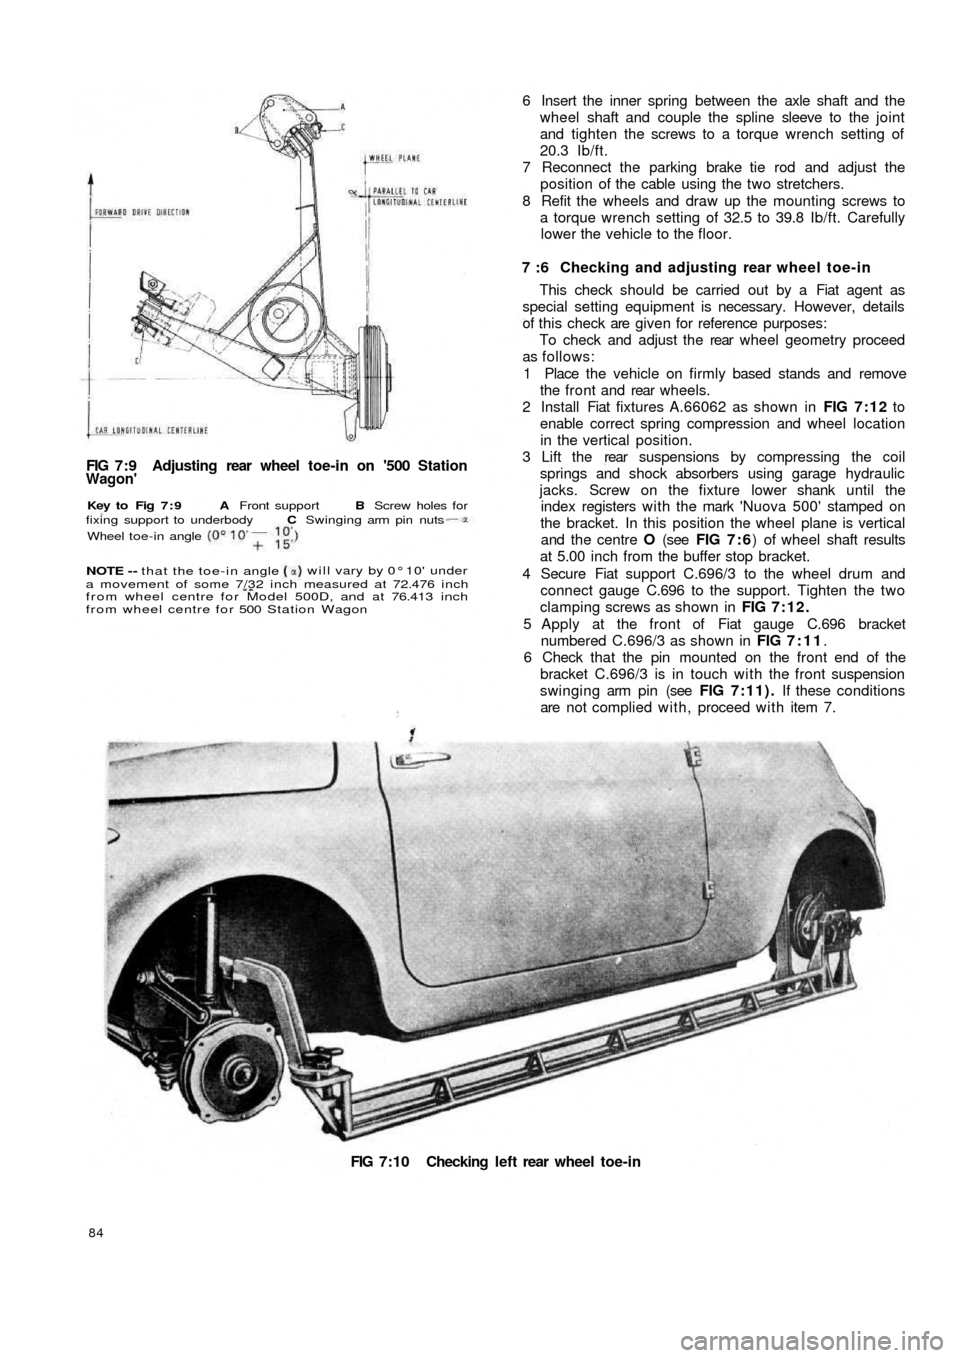 FIAT 500 1971 1.G Workshop Manual FIG 7:9  Adjusting  rear  wheel toe-in on 500 StationWagon
FIG 7:10 Checking left rear wheel toe-in
84
6 Insert the inner spring between the axle shaft and the
wheel shaft and couple the spline slee